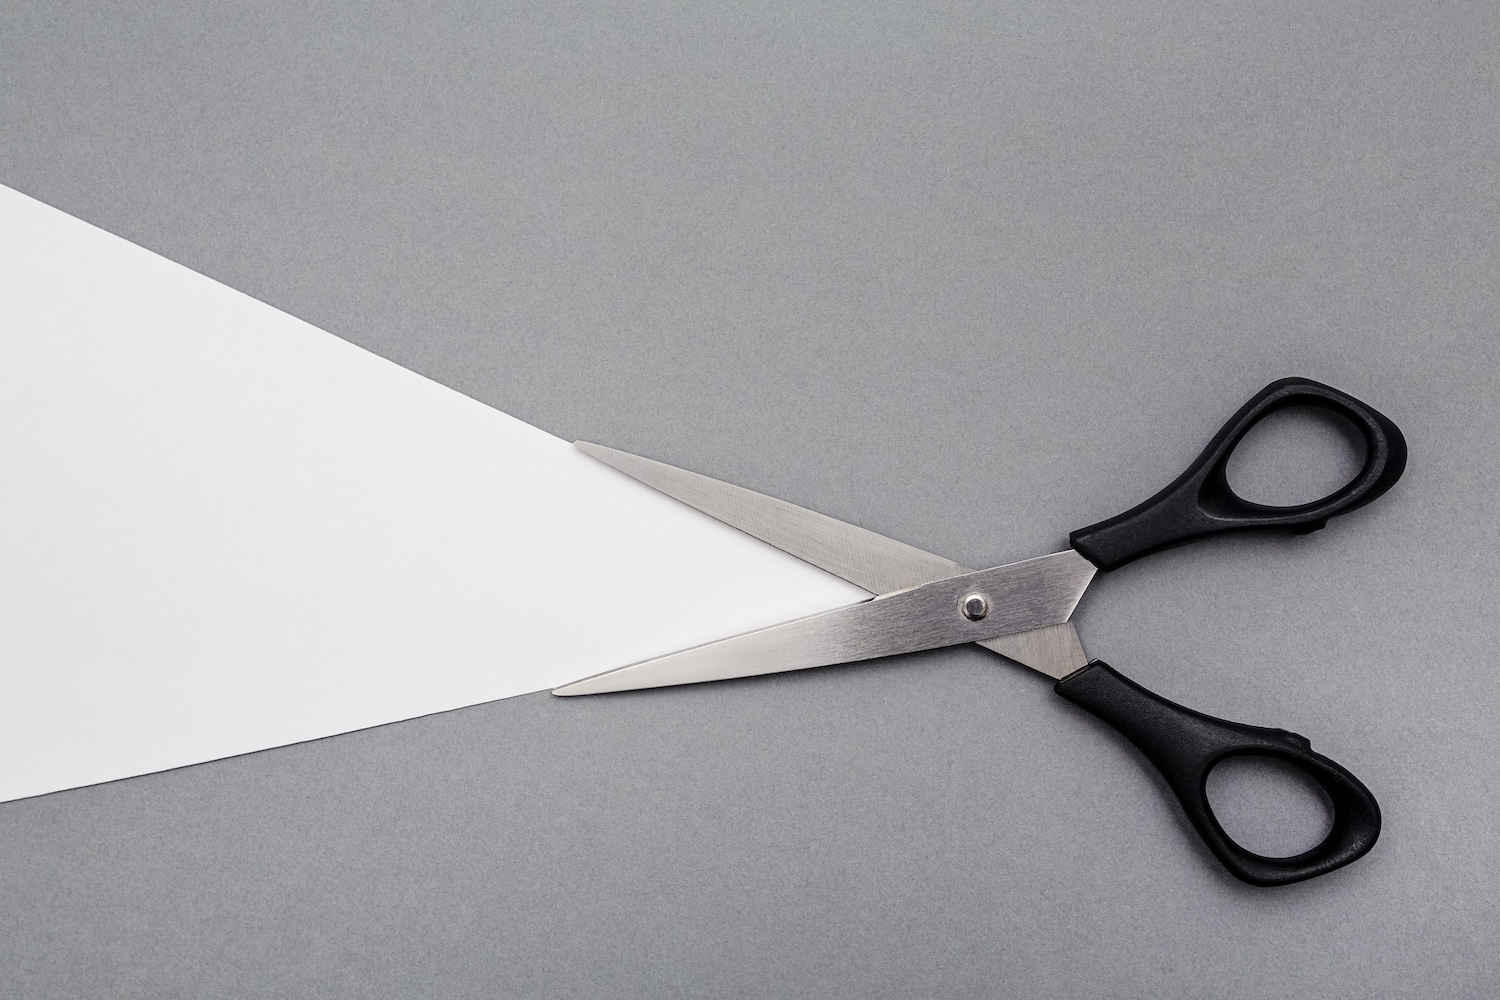 scissors with black handle against a gray background